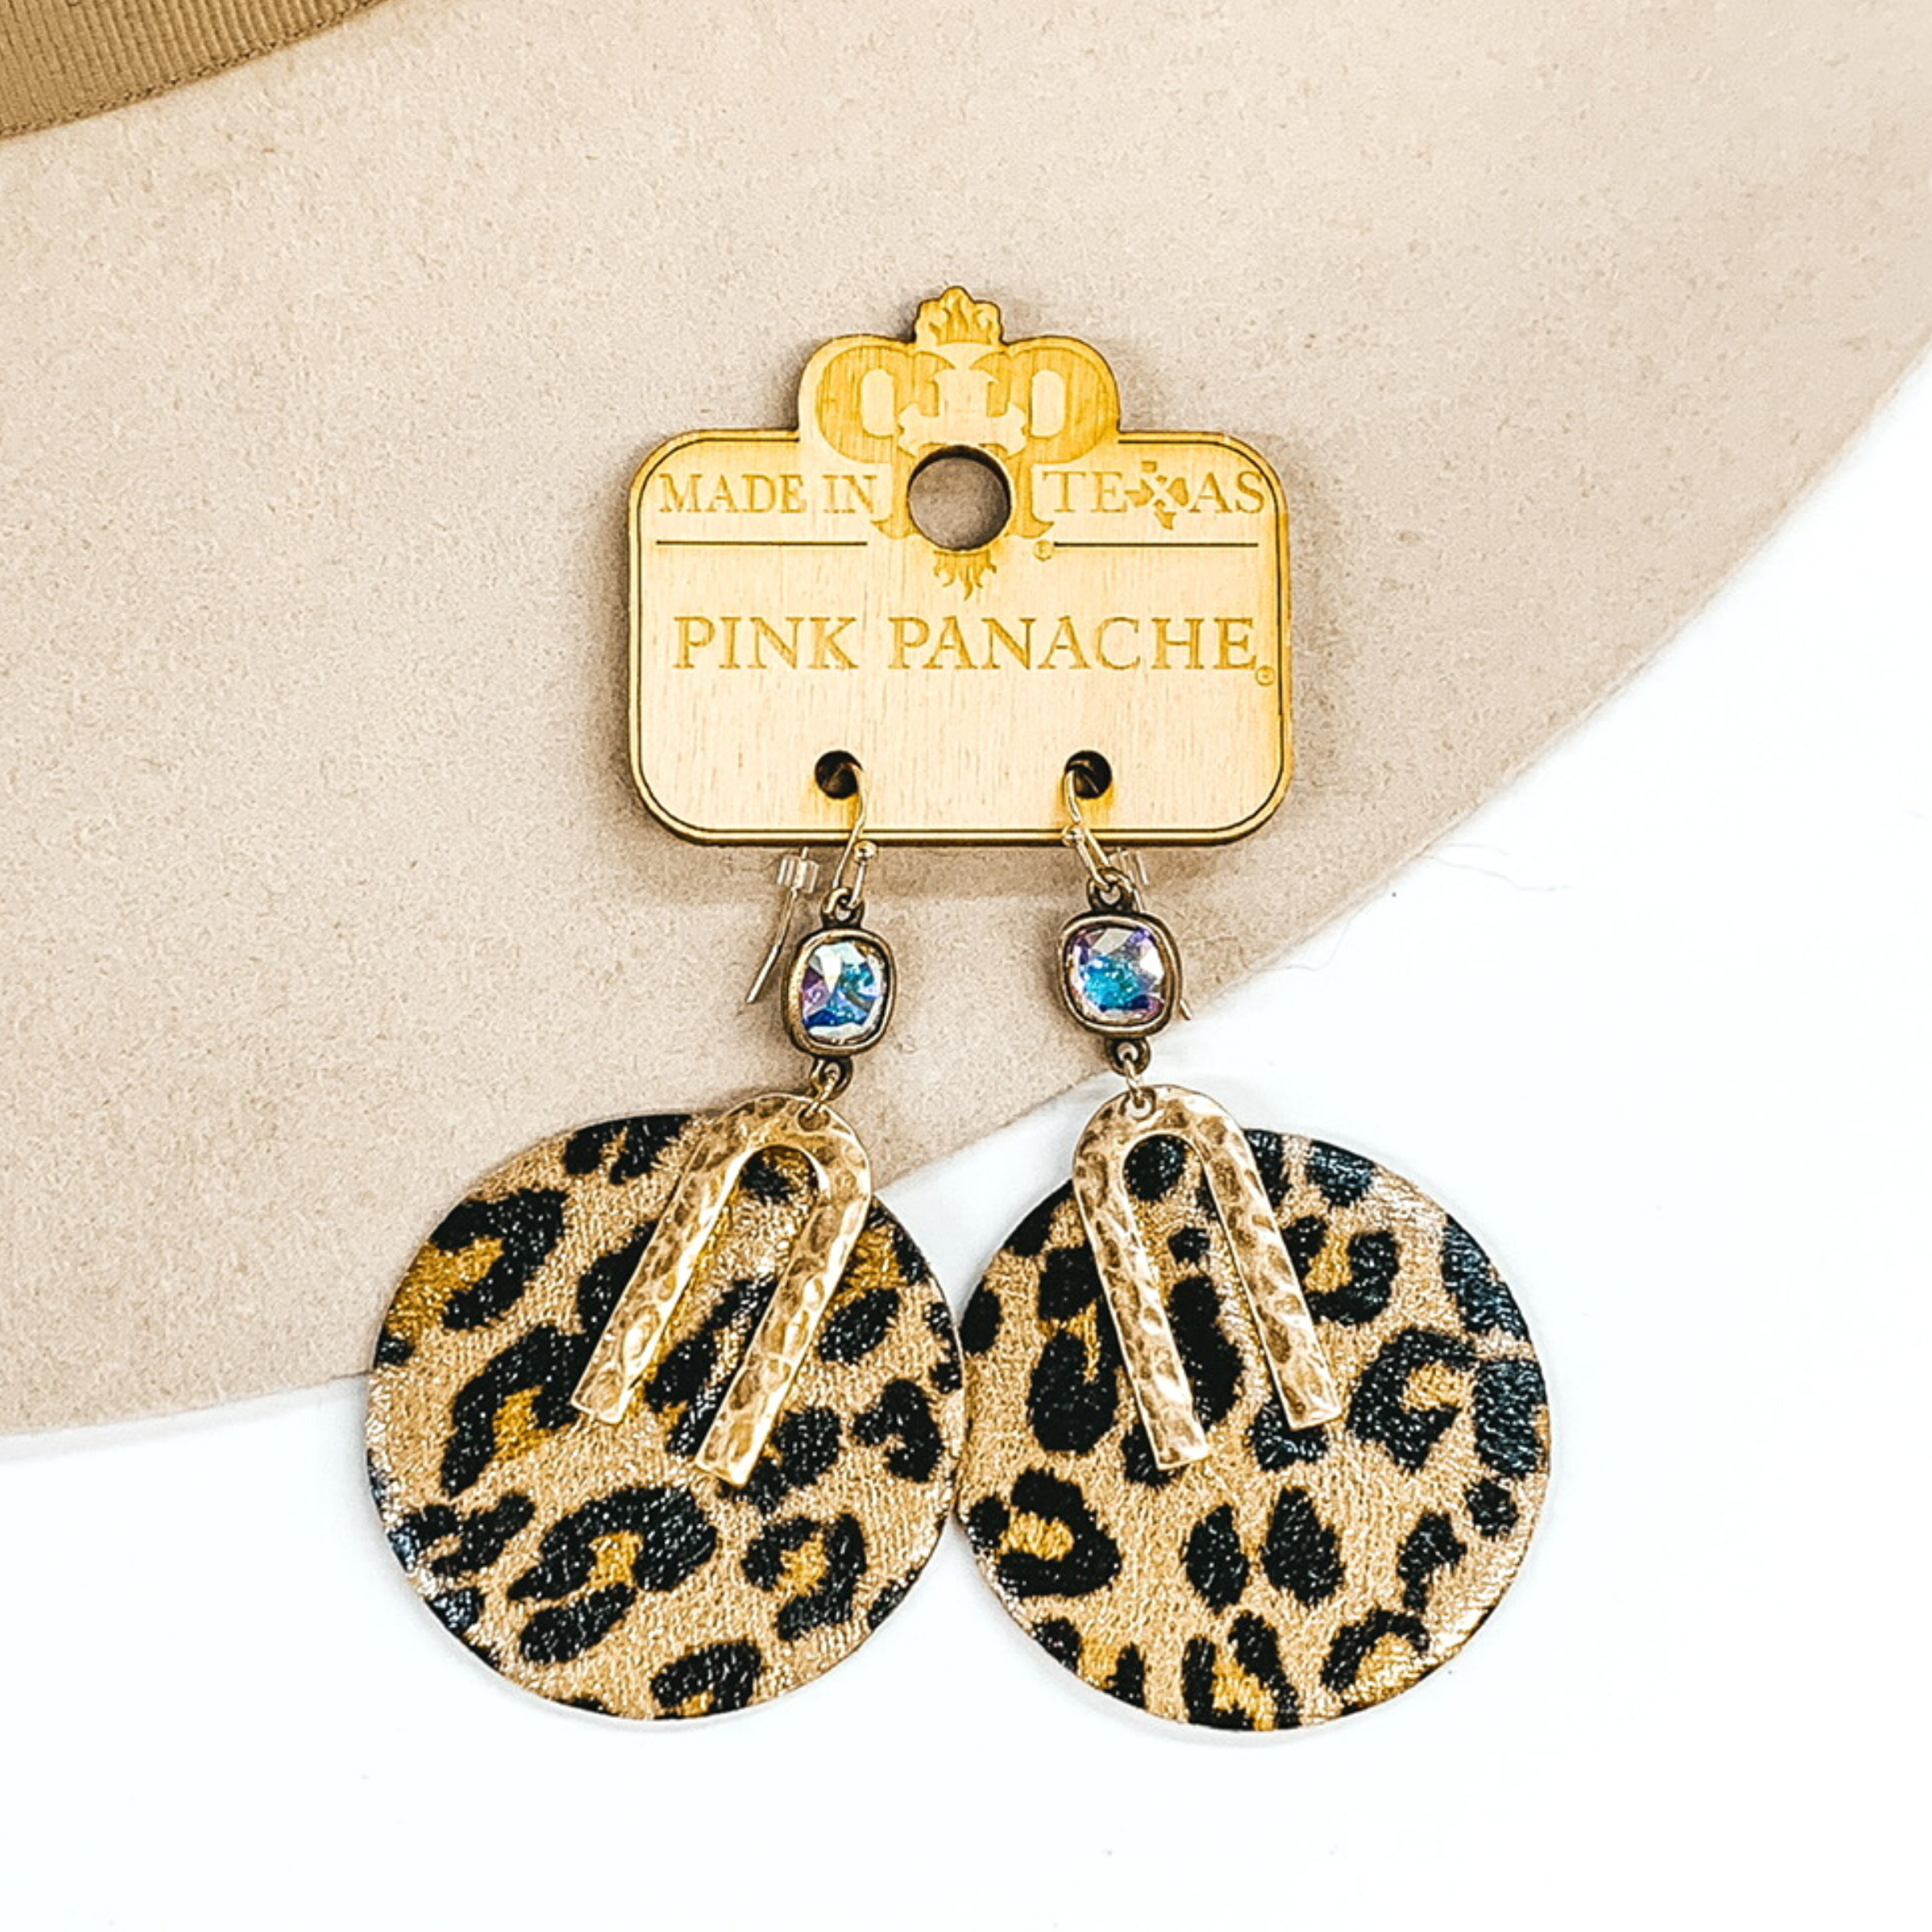 AB cushion cut crystal dangle earrings with a hanging, leopard circle pendant. The pendant has a small gold "U" shaped accent. These earrings are pictured on a white and beige earrings.